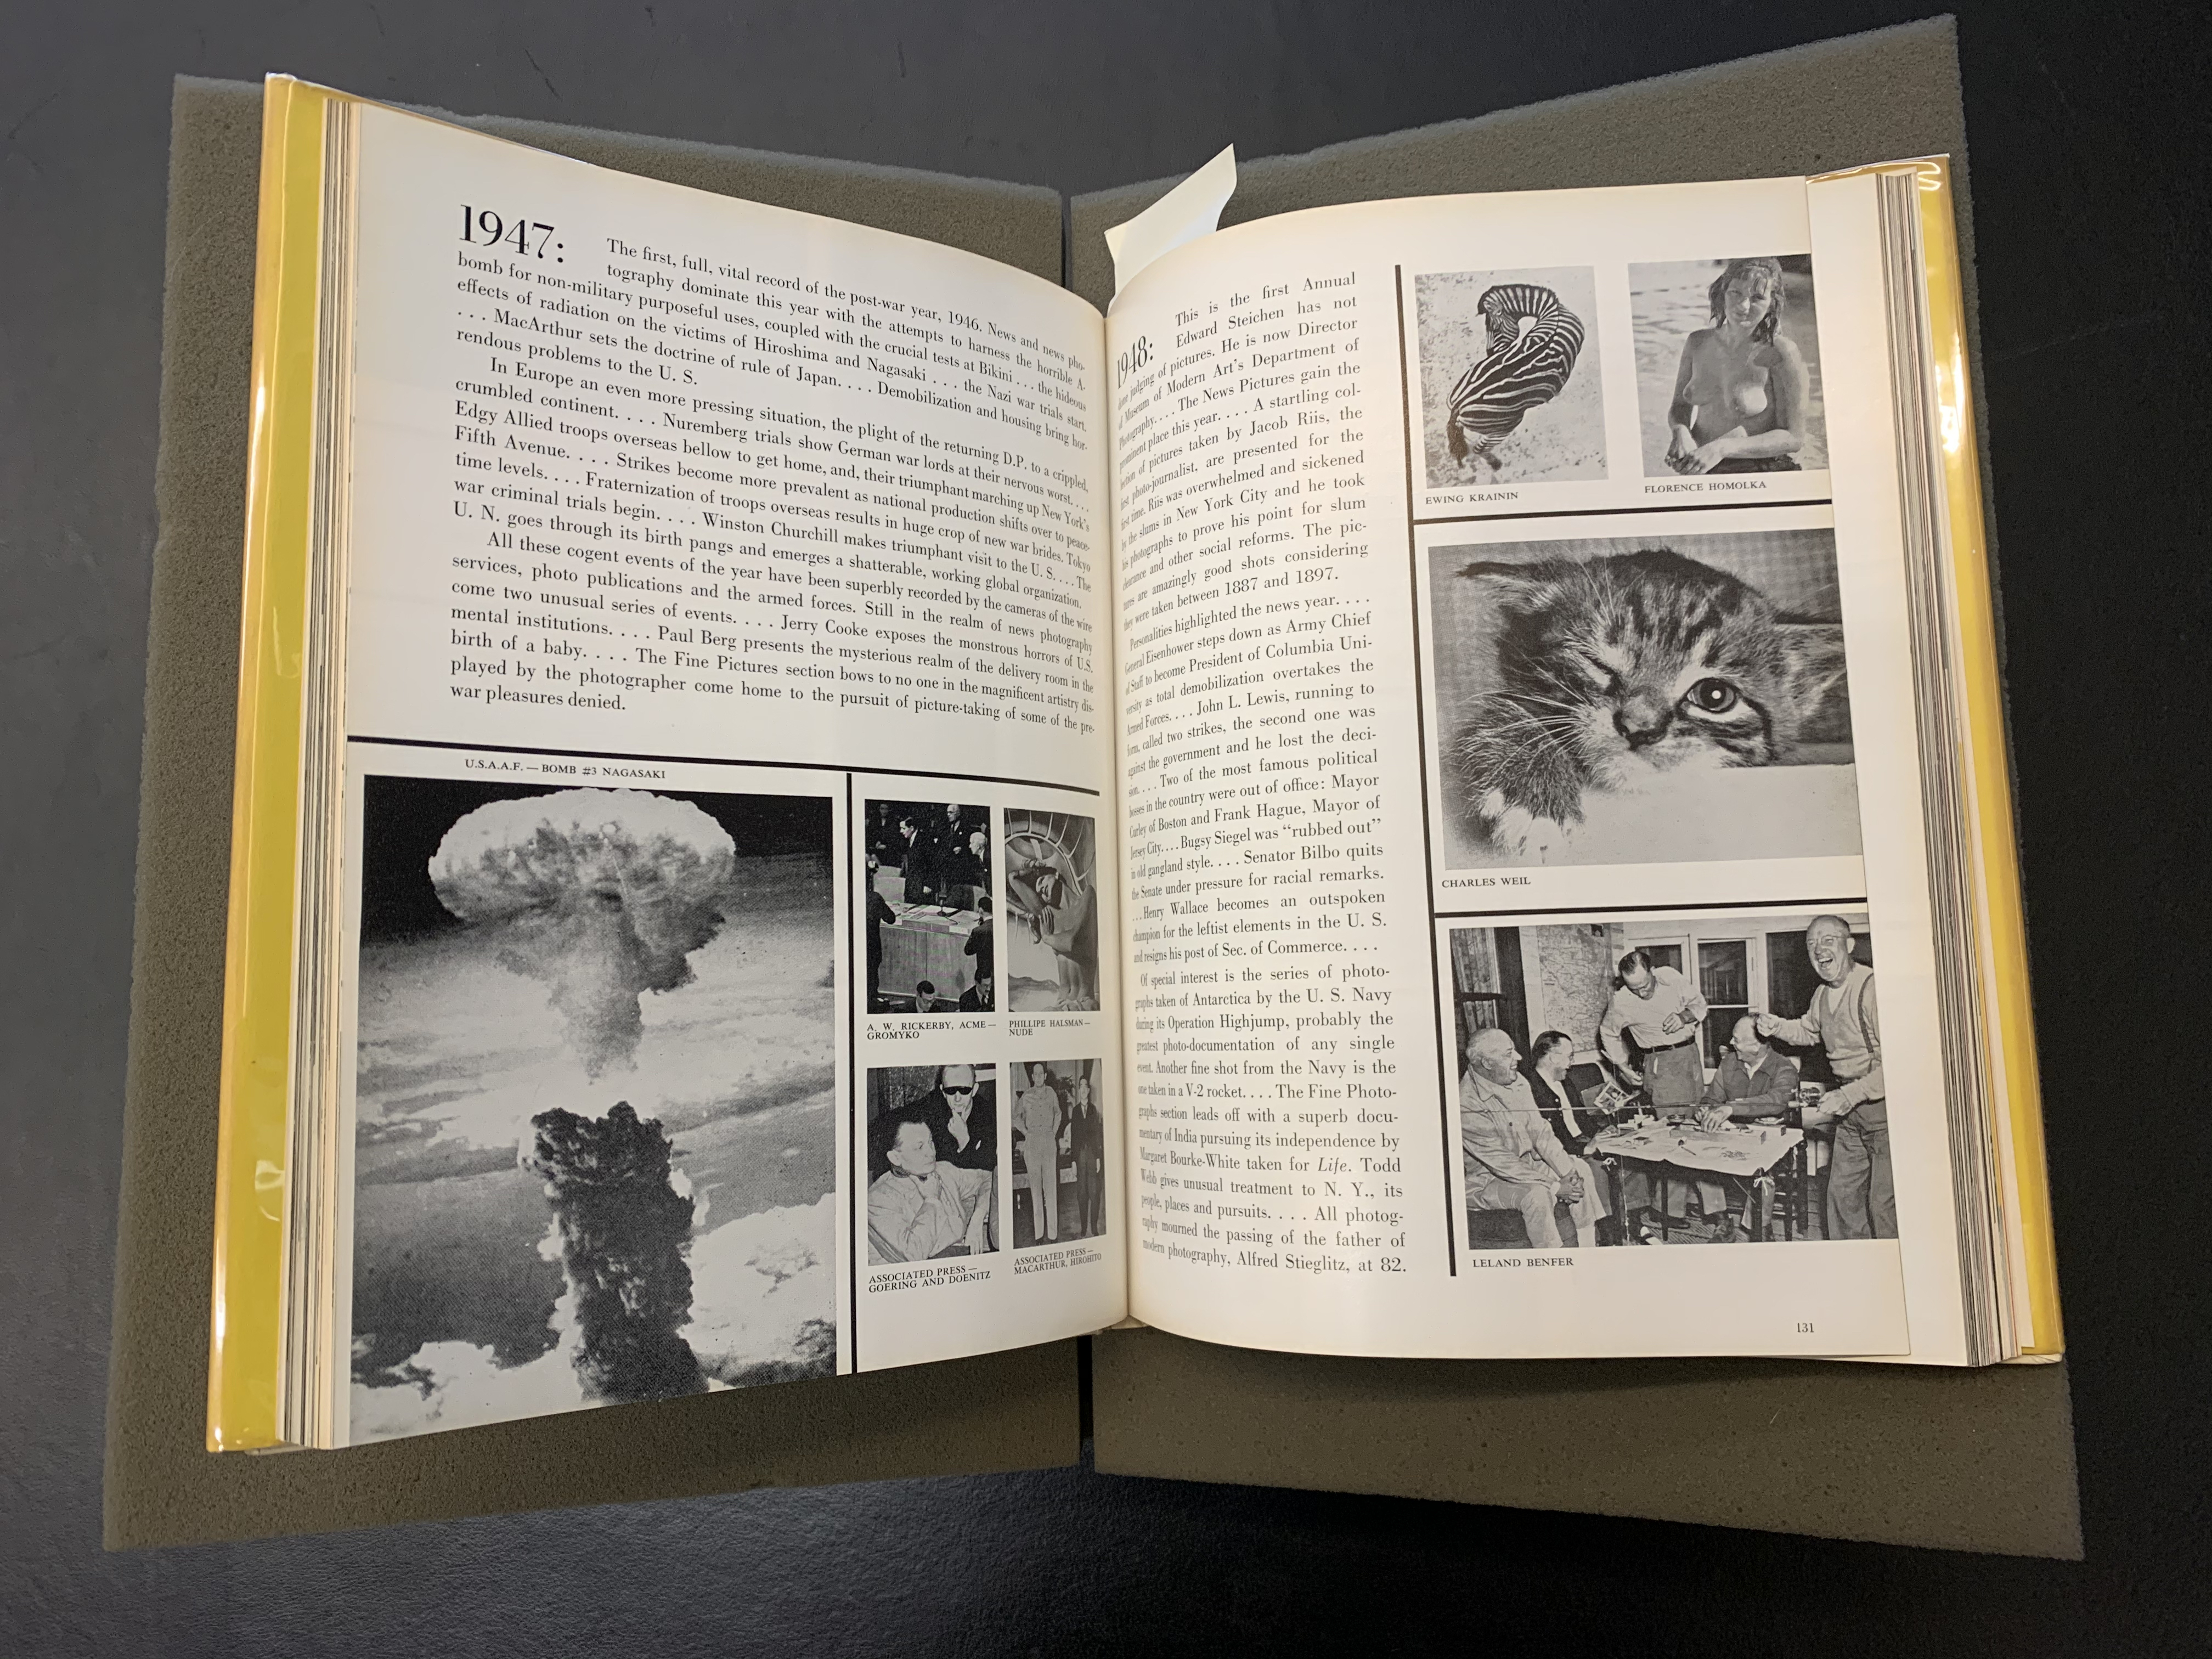 Open copy of The Picture Universe showing photographs from the year 1947